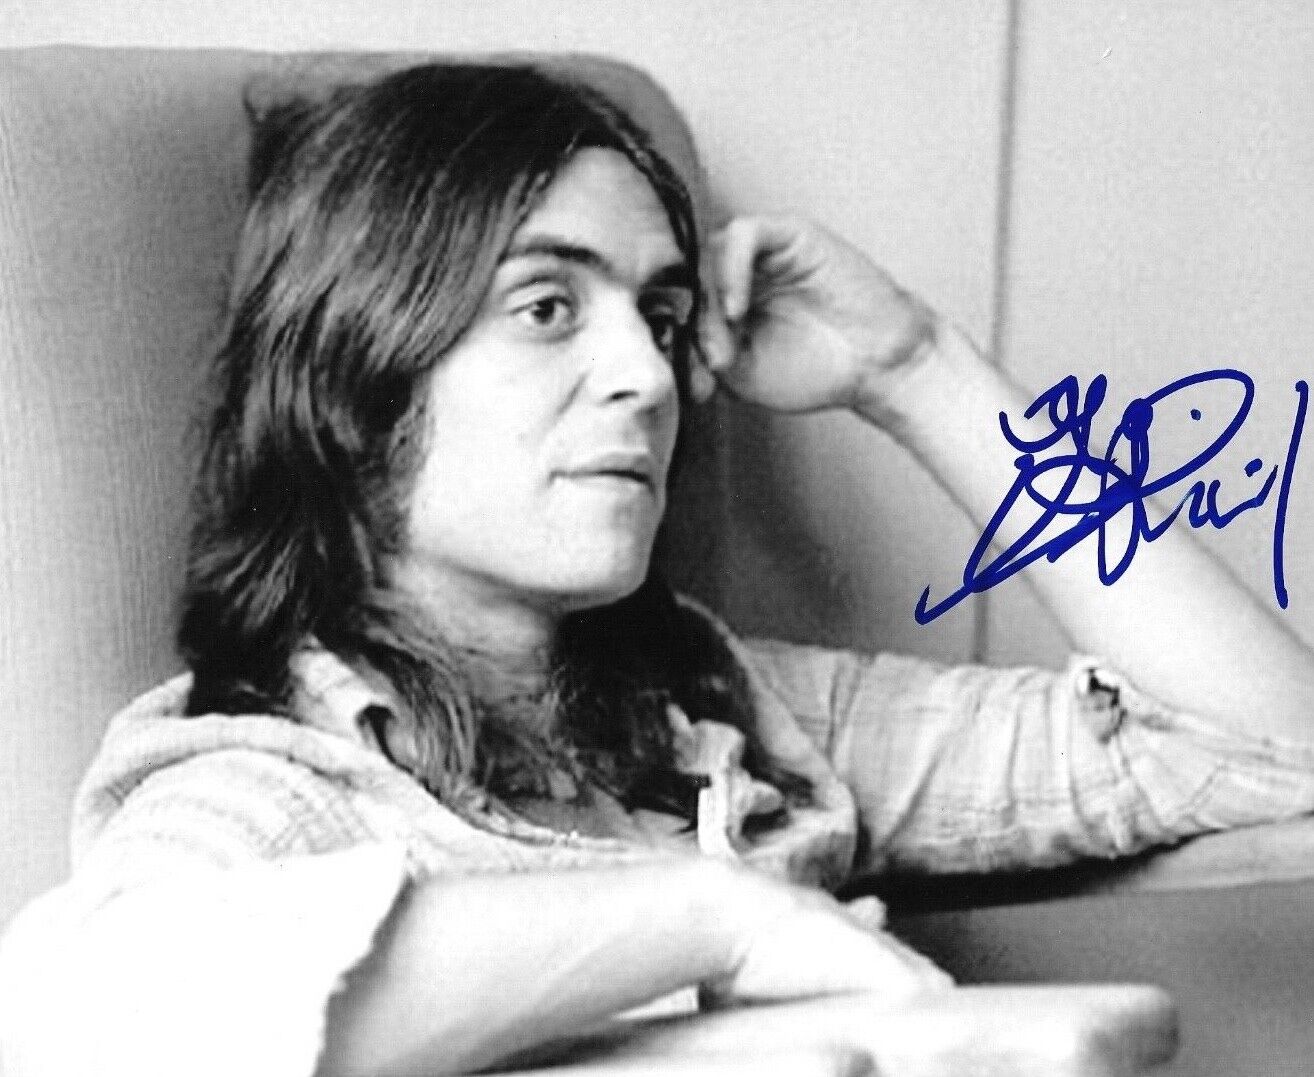 * TERRY REID * signed 8x10 Photo Poster painting * ROGUE WAVES * LED ZEPPELIN * PROOF * 5